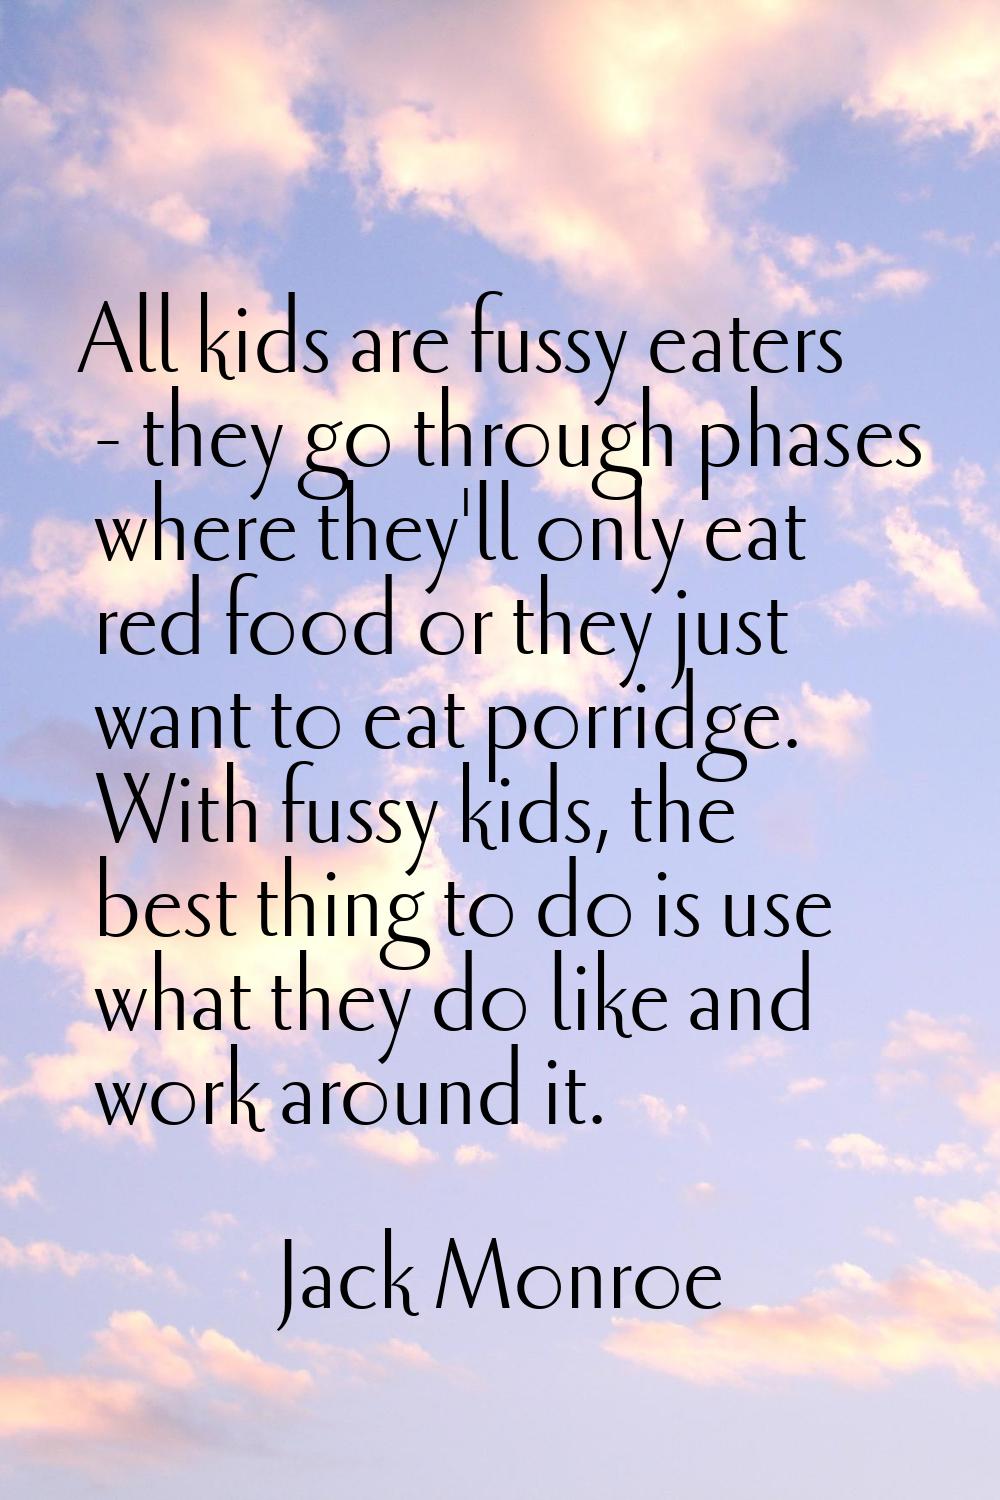 All kids are fussy eaters - they go through phases where they'll only eat red food or they just wan